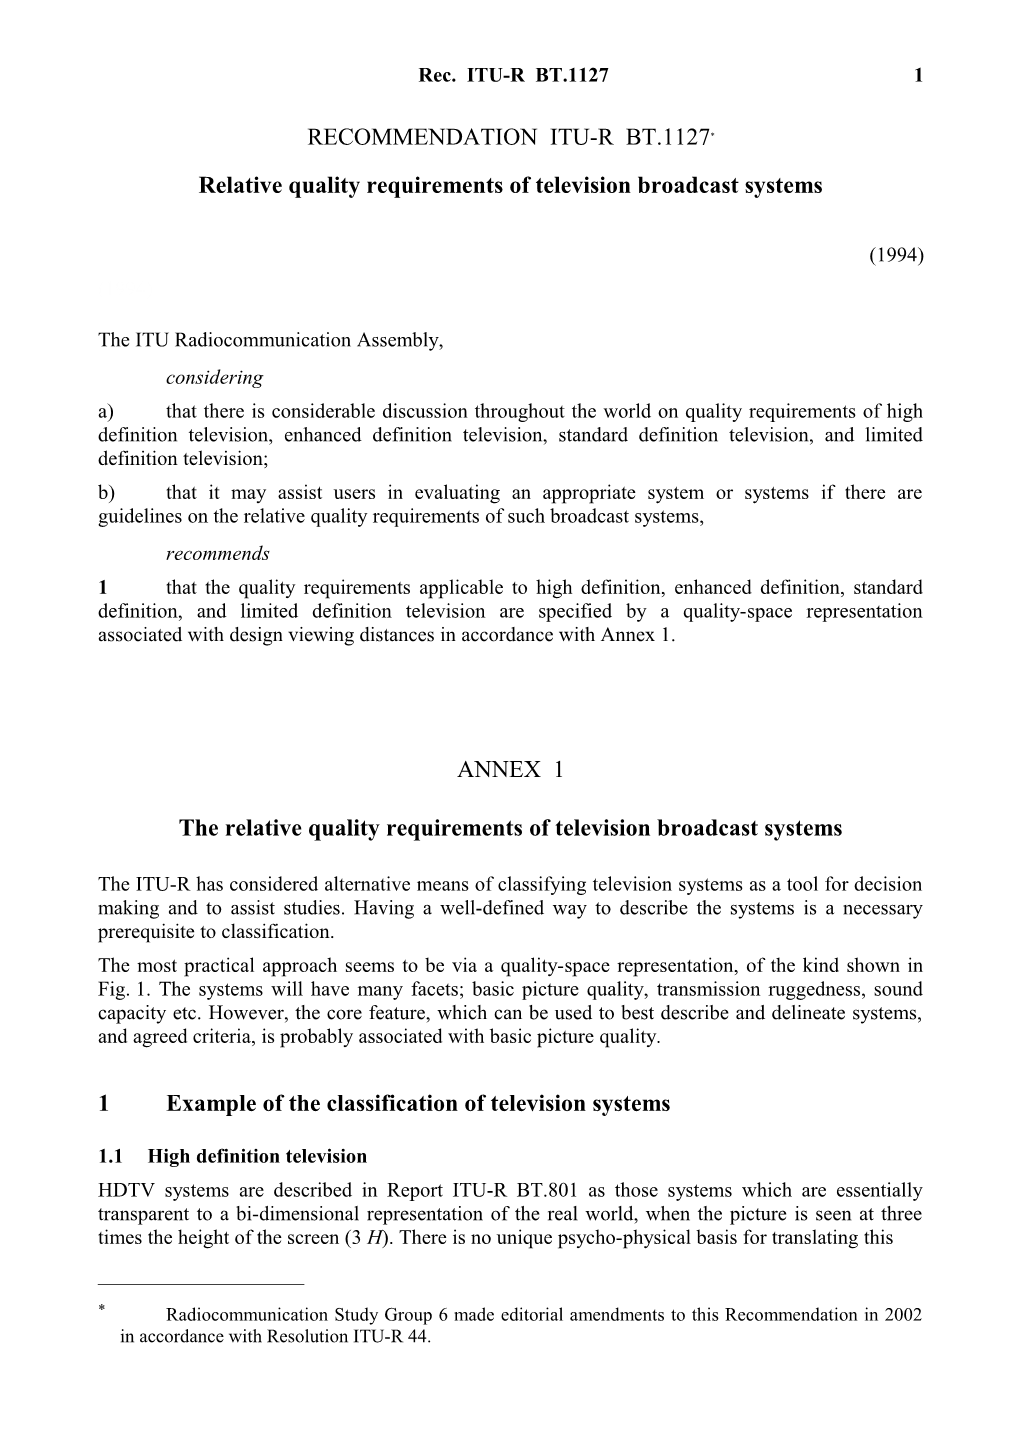 RECOMMENDATION ITU-R BT.1127 - Relative Quality Requirements of Television Broadcast Systems